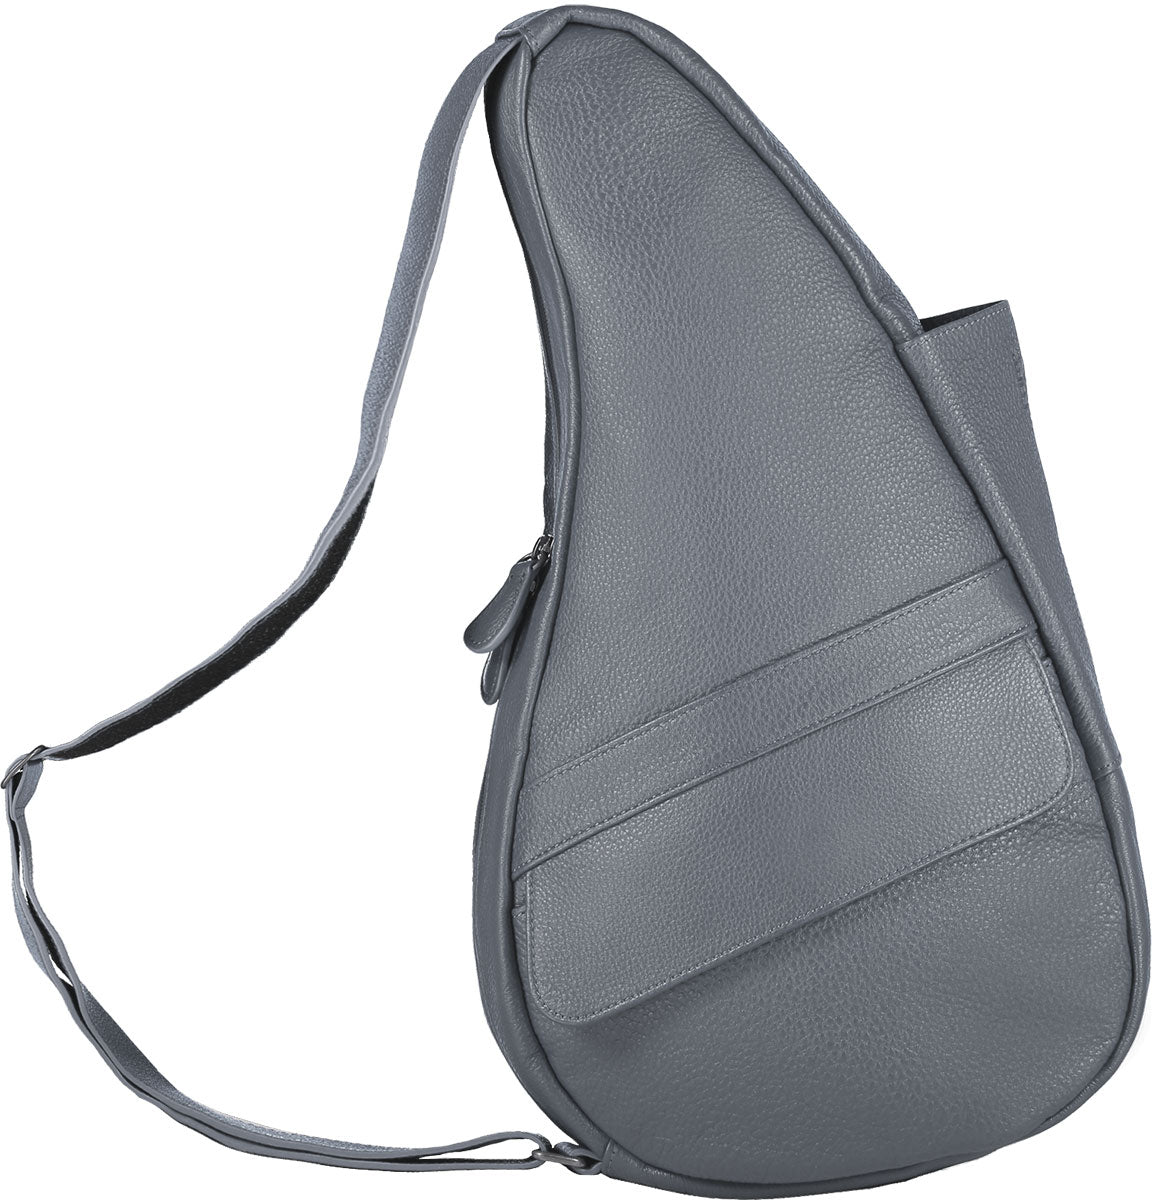 AmeriBag Healthy Back Bag tote Leather Extra Small (Grey)